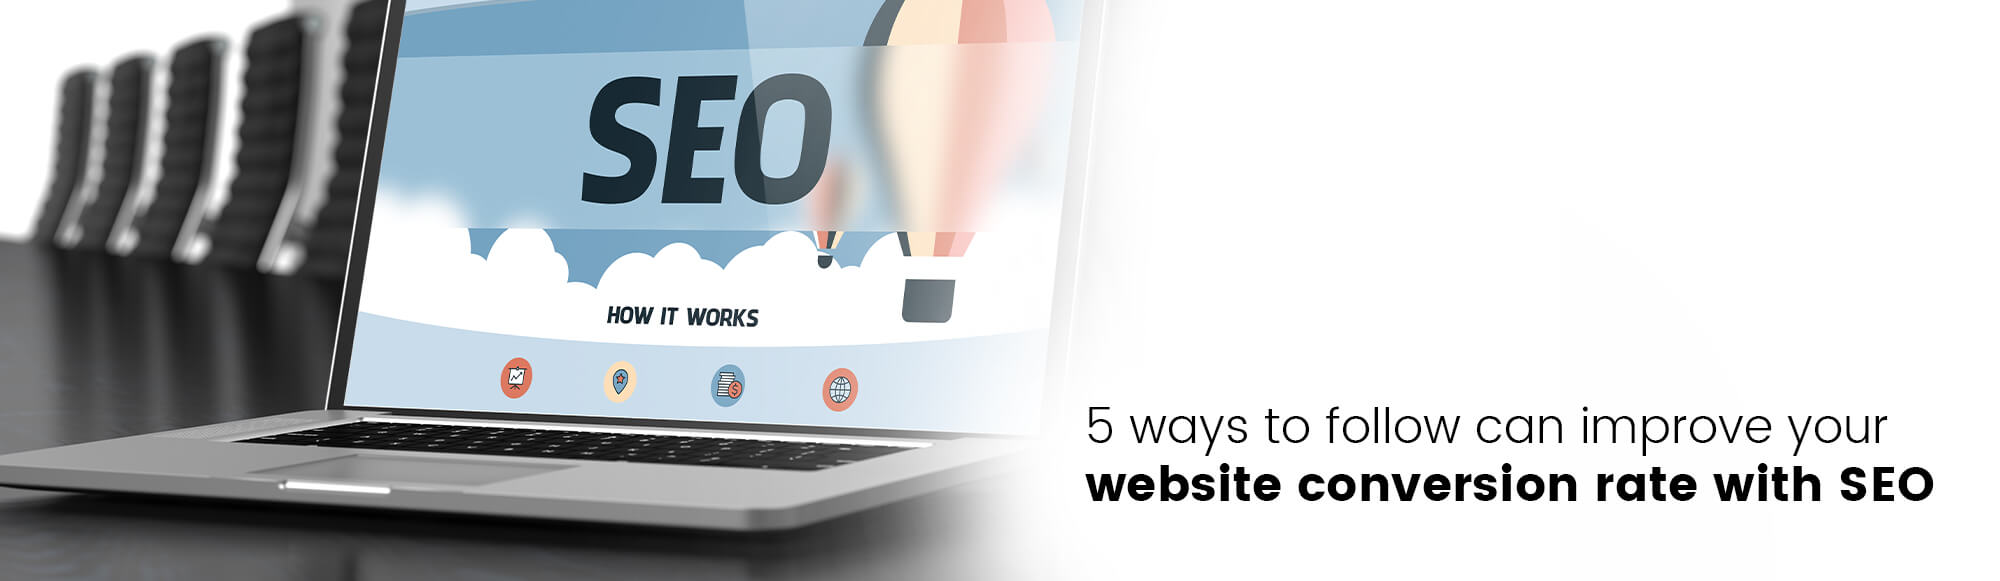 5 methods for increasing website conversion rates using SEO.